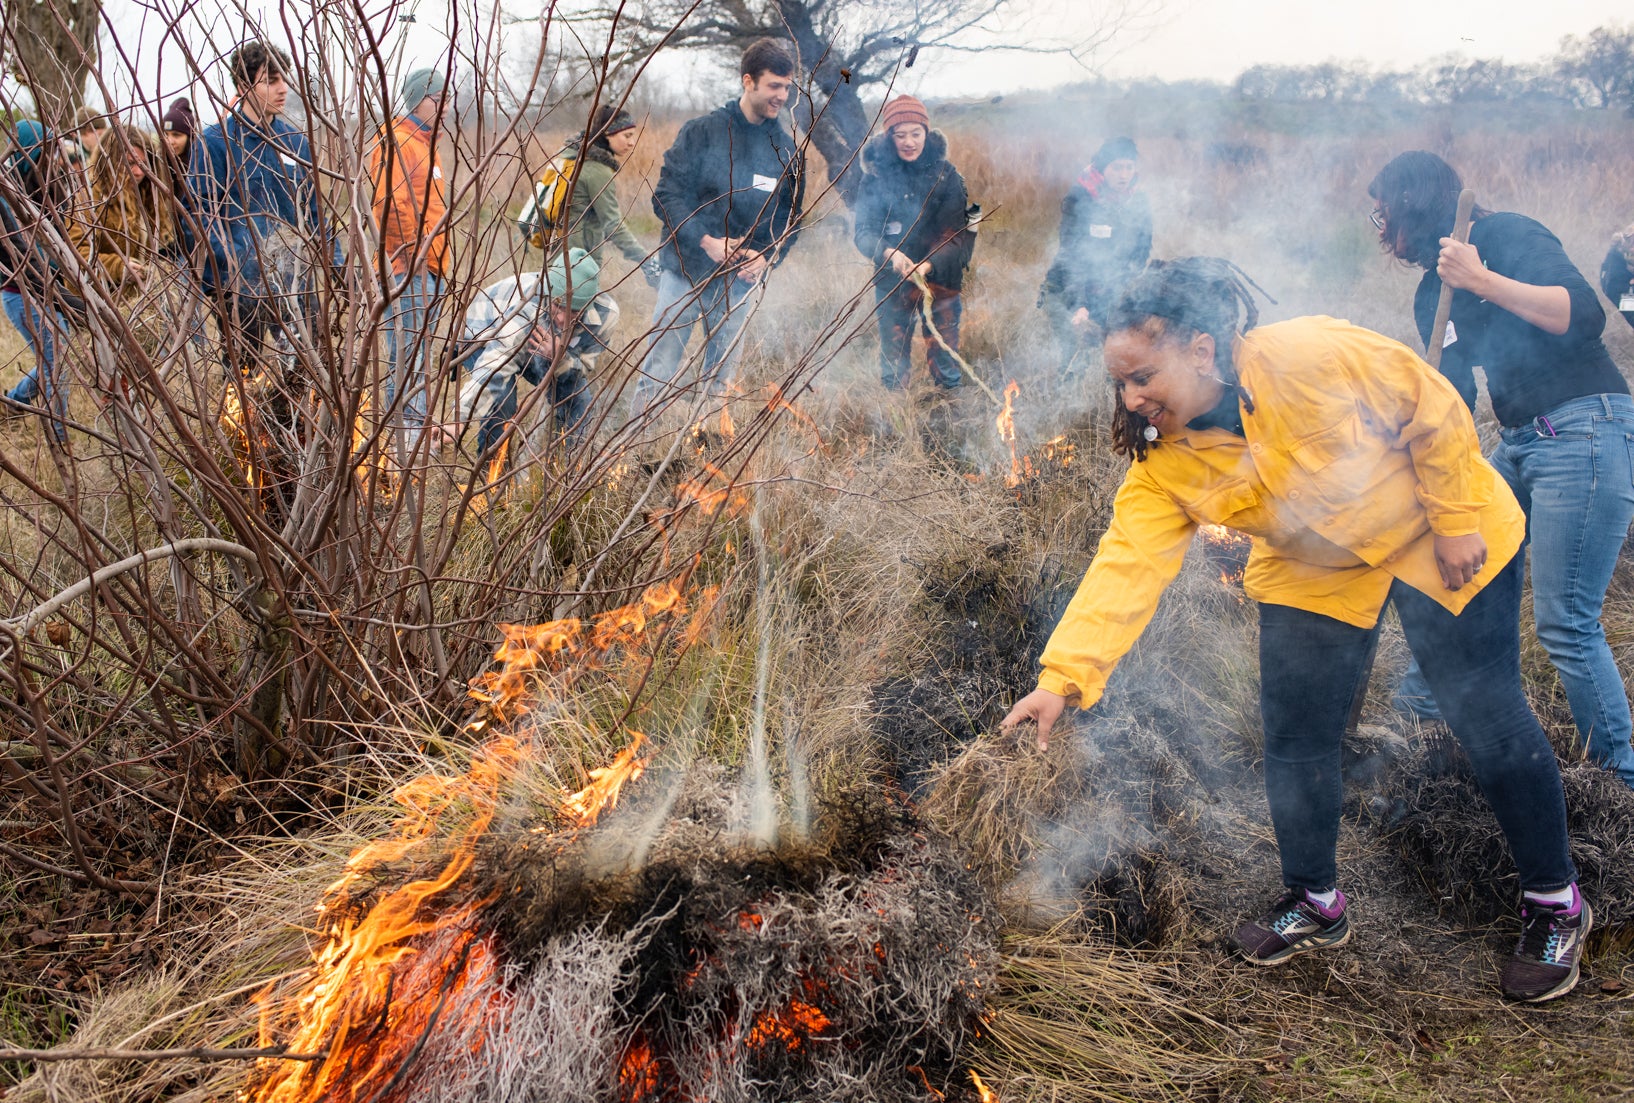 Beth Rose Middleton Manning in yellow jacket leans over burning pile of deergrass near other participants of a cultural burn at a nature reserve.